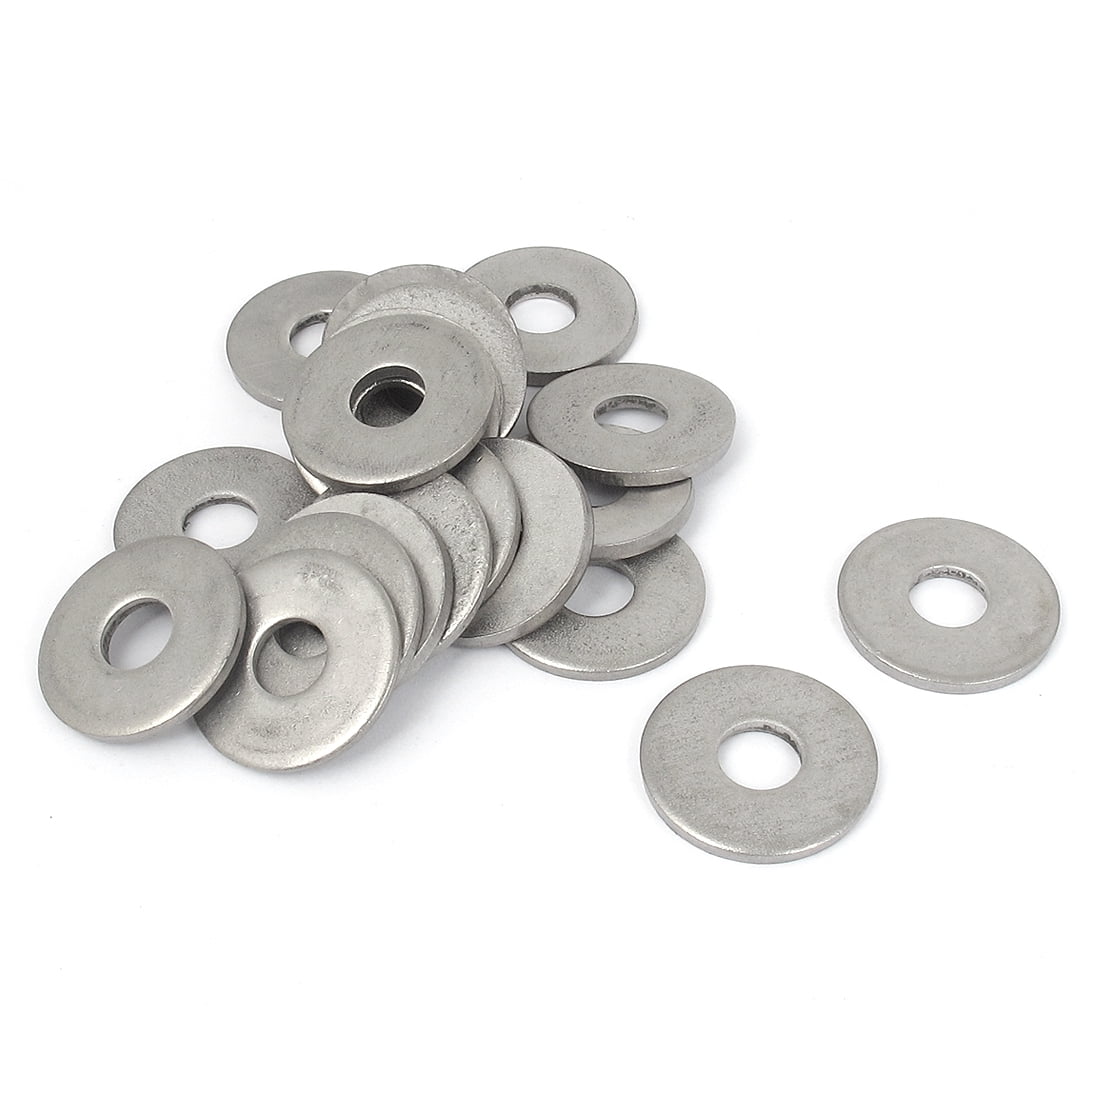 Lot 300 Stainless Steel Nickel Snap Sockets M4 #8 Screw Trim Finish Washers New 